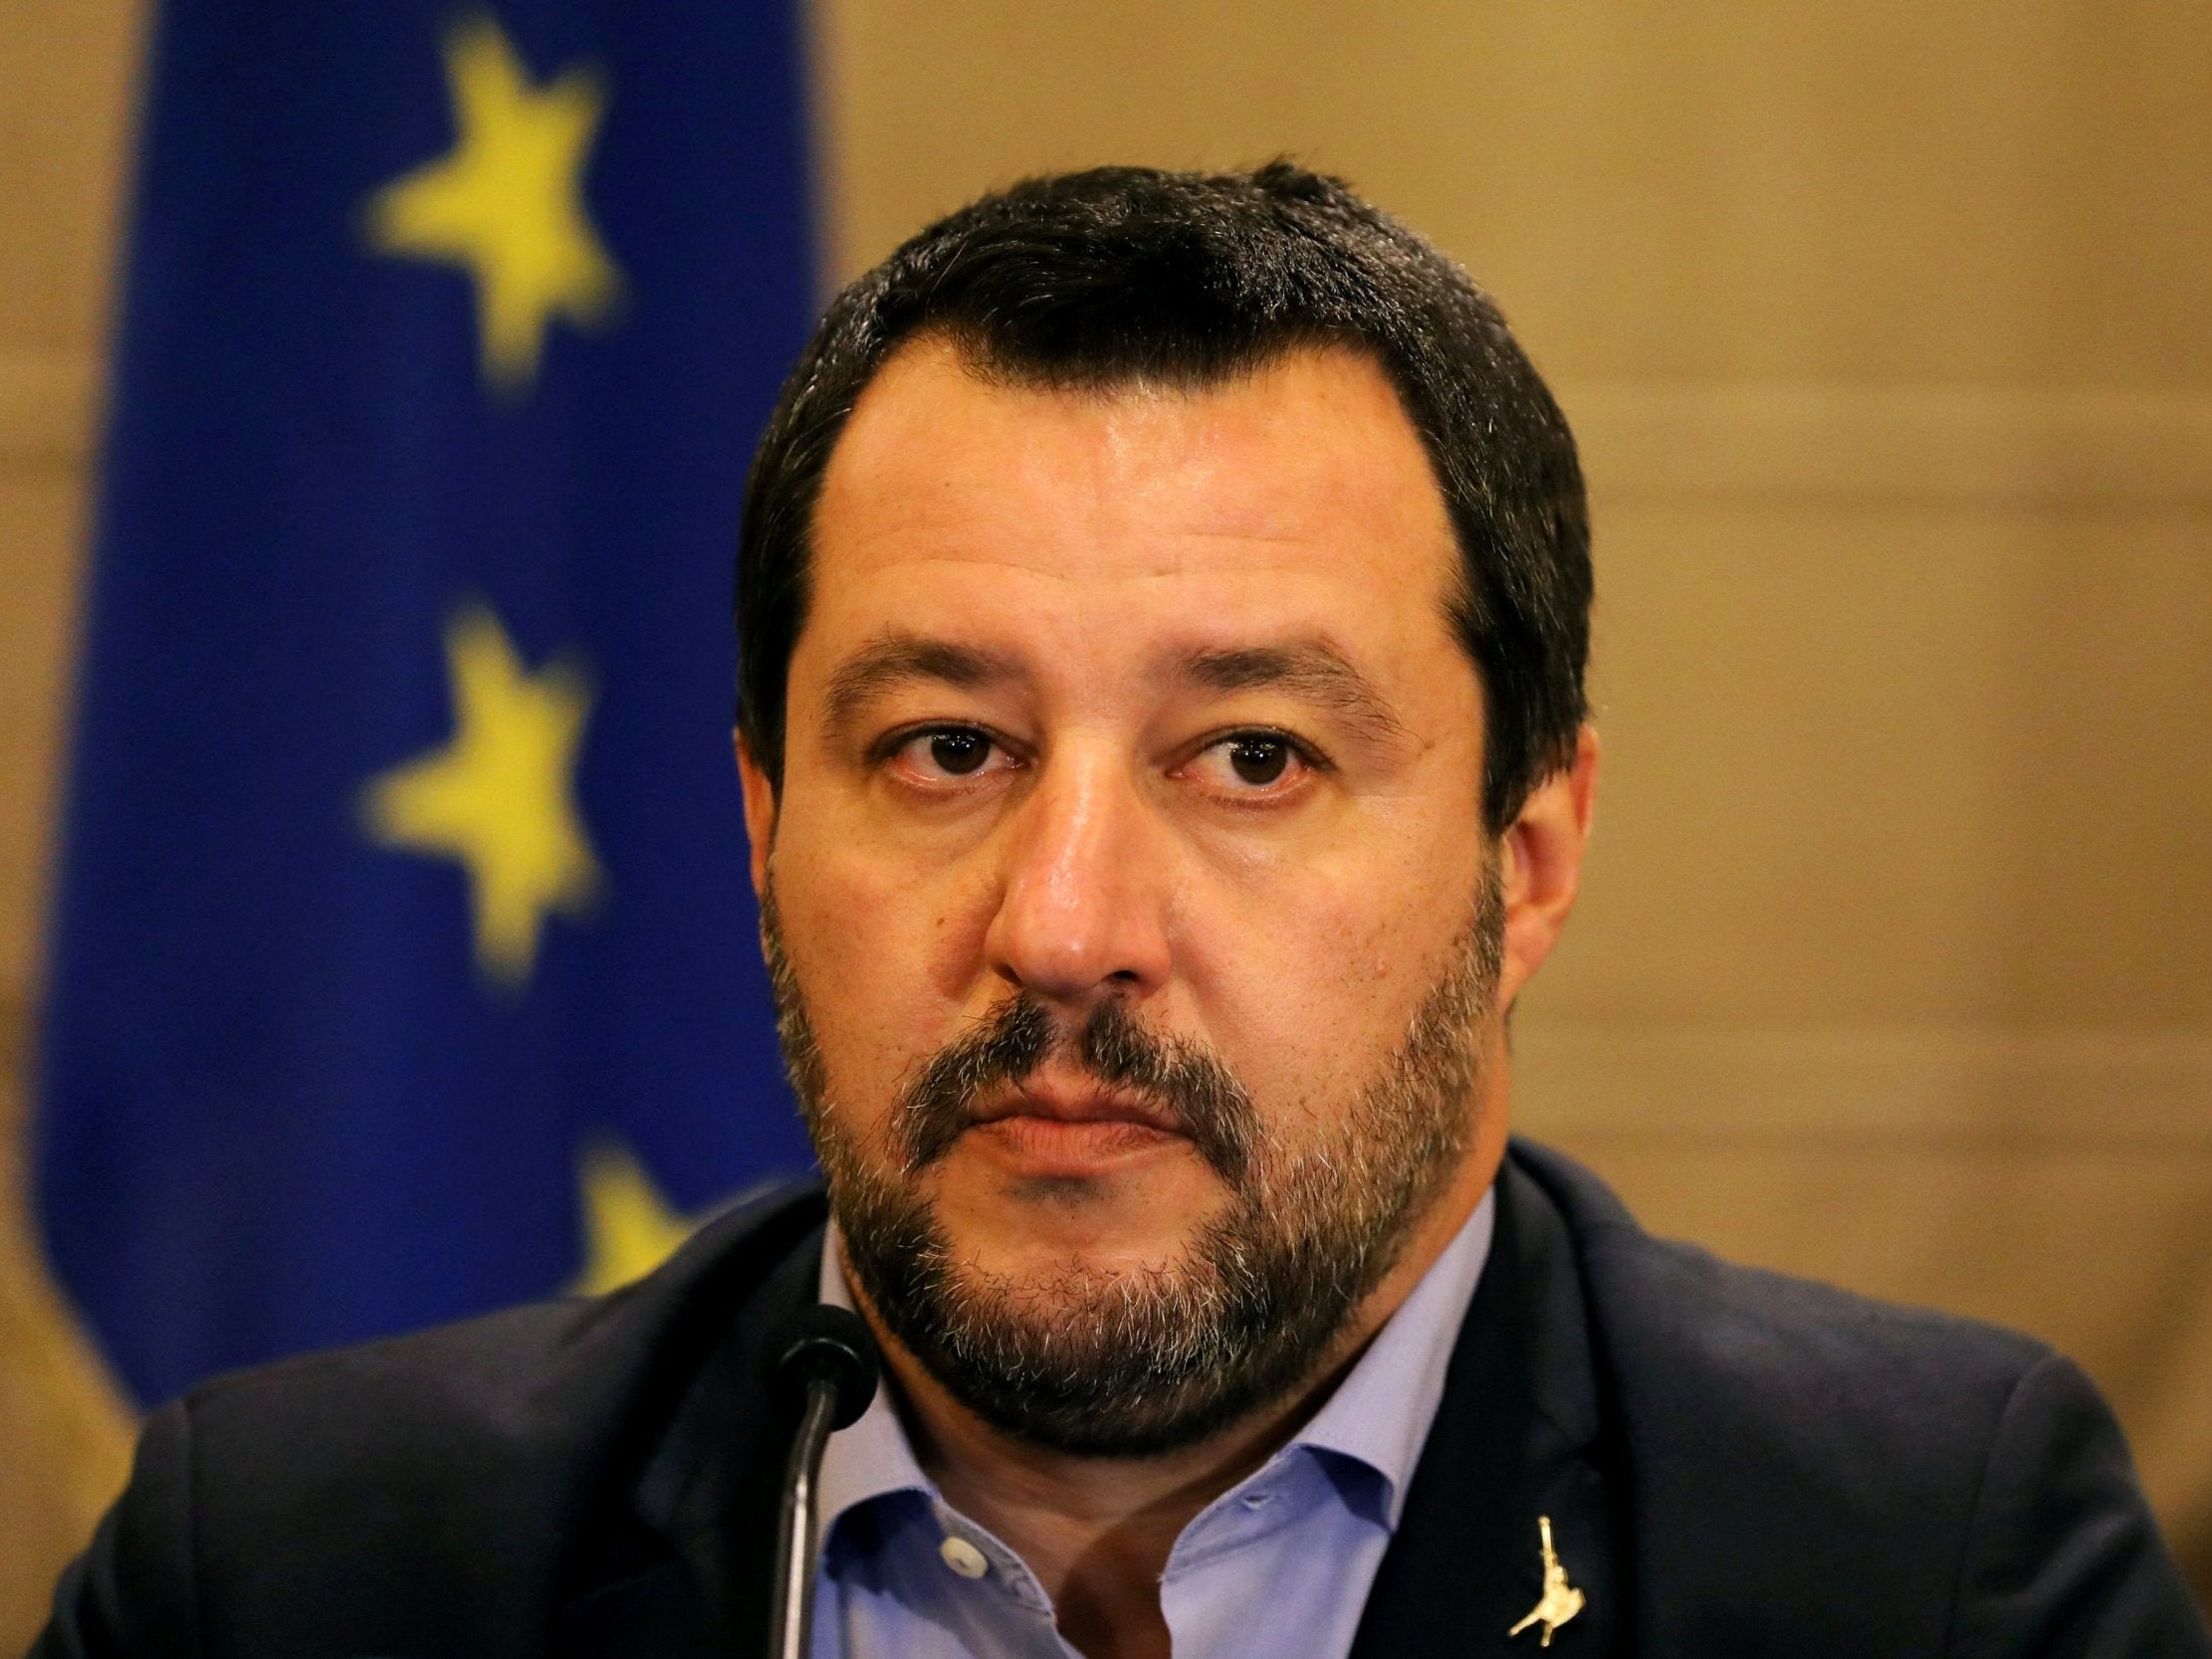 Matteo Salvini, League party leader and interior minister, will focus more and more on migration